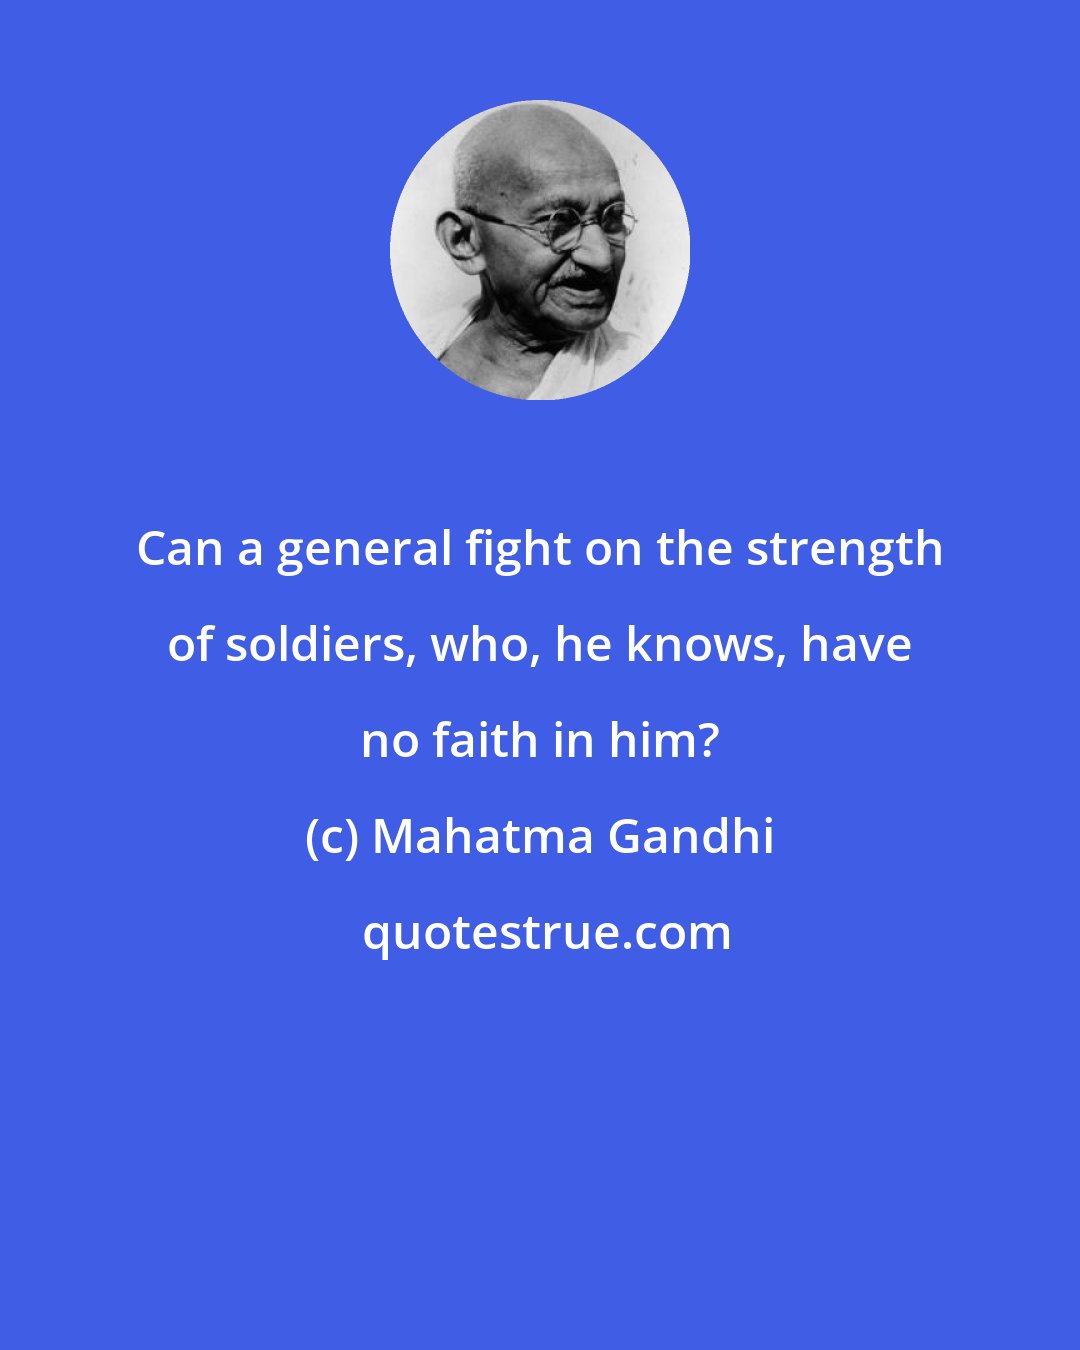 Mahatma Gandhi: Can a general fight on the strength of soldiers, who, he knows, have no faith in him?